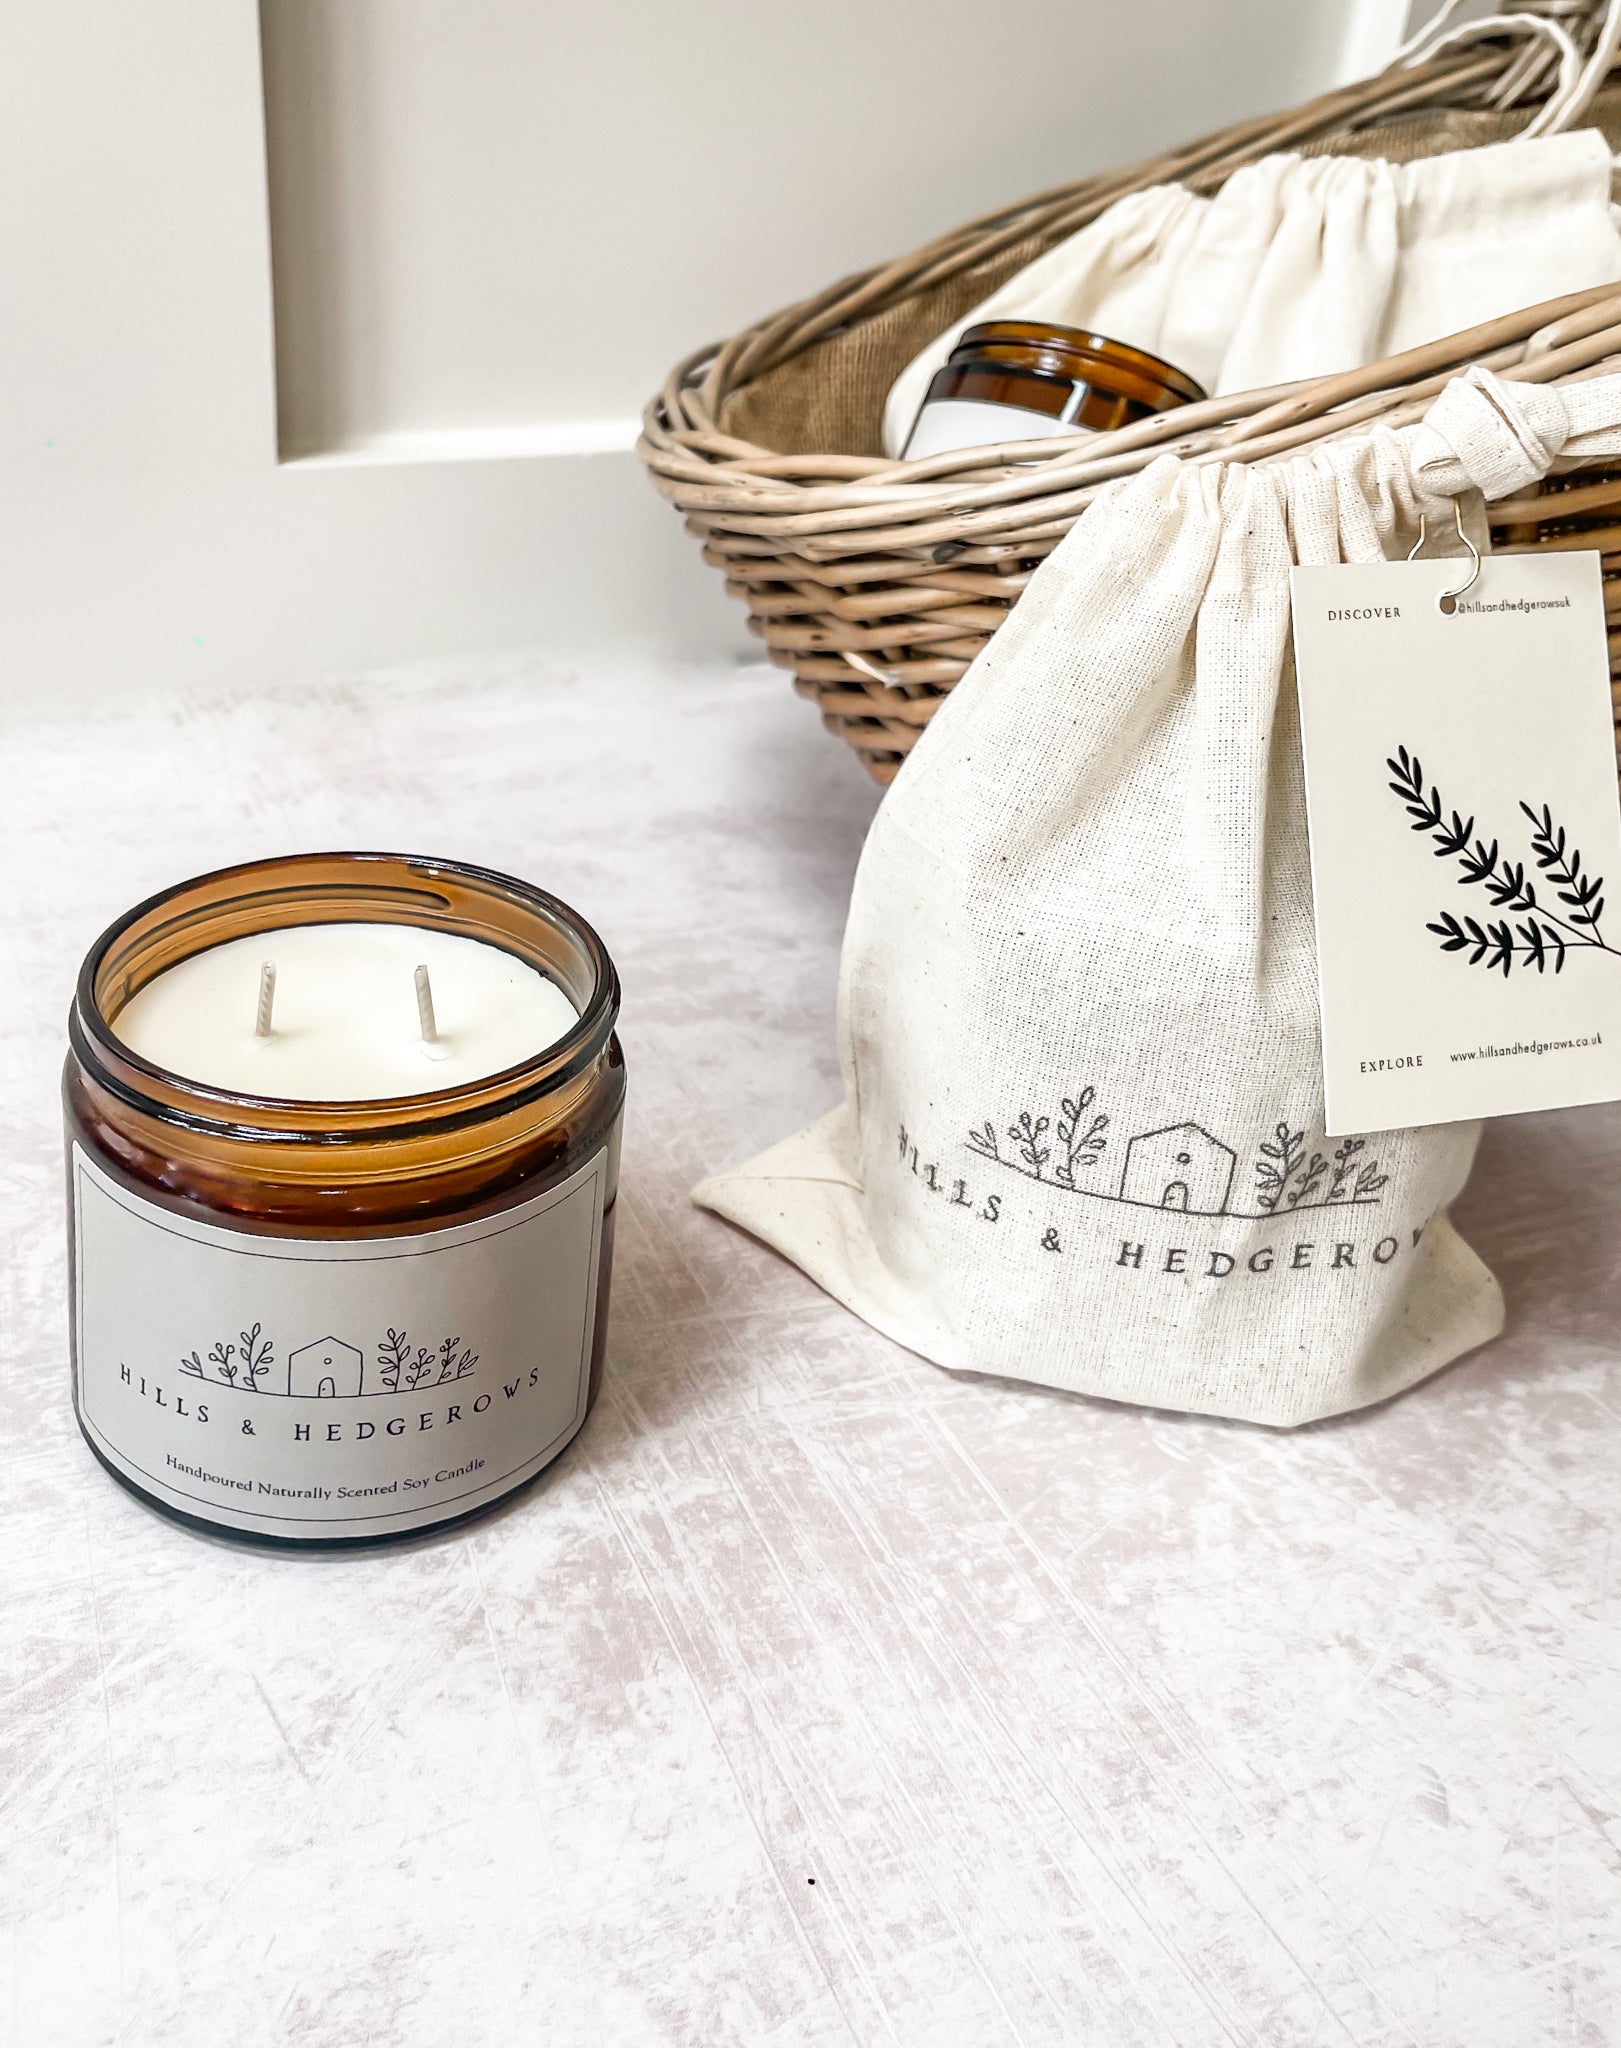 Crafted to evoke the warmth and tranquility of the countryside with our Hills and Hedgerows hand-poured naturally scented soy candle. Amber glass with green label, comes with Cotton pouch ready for gifting.